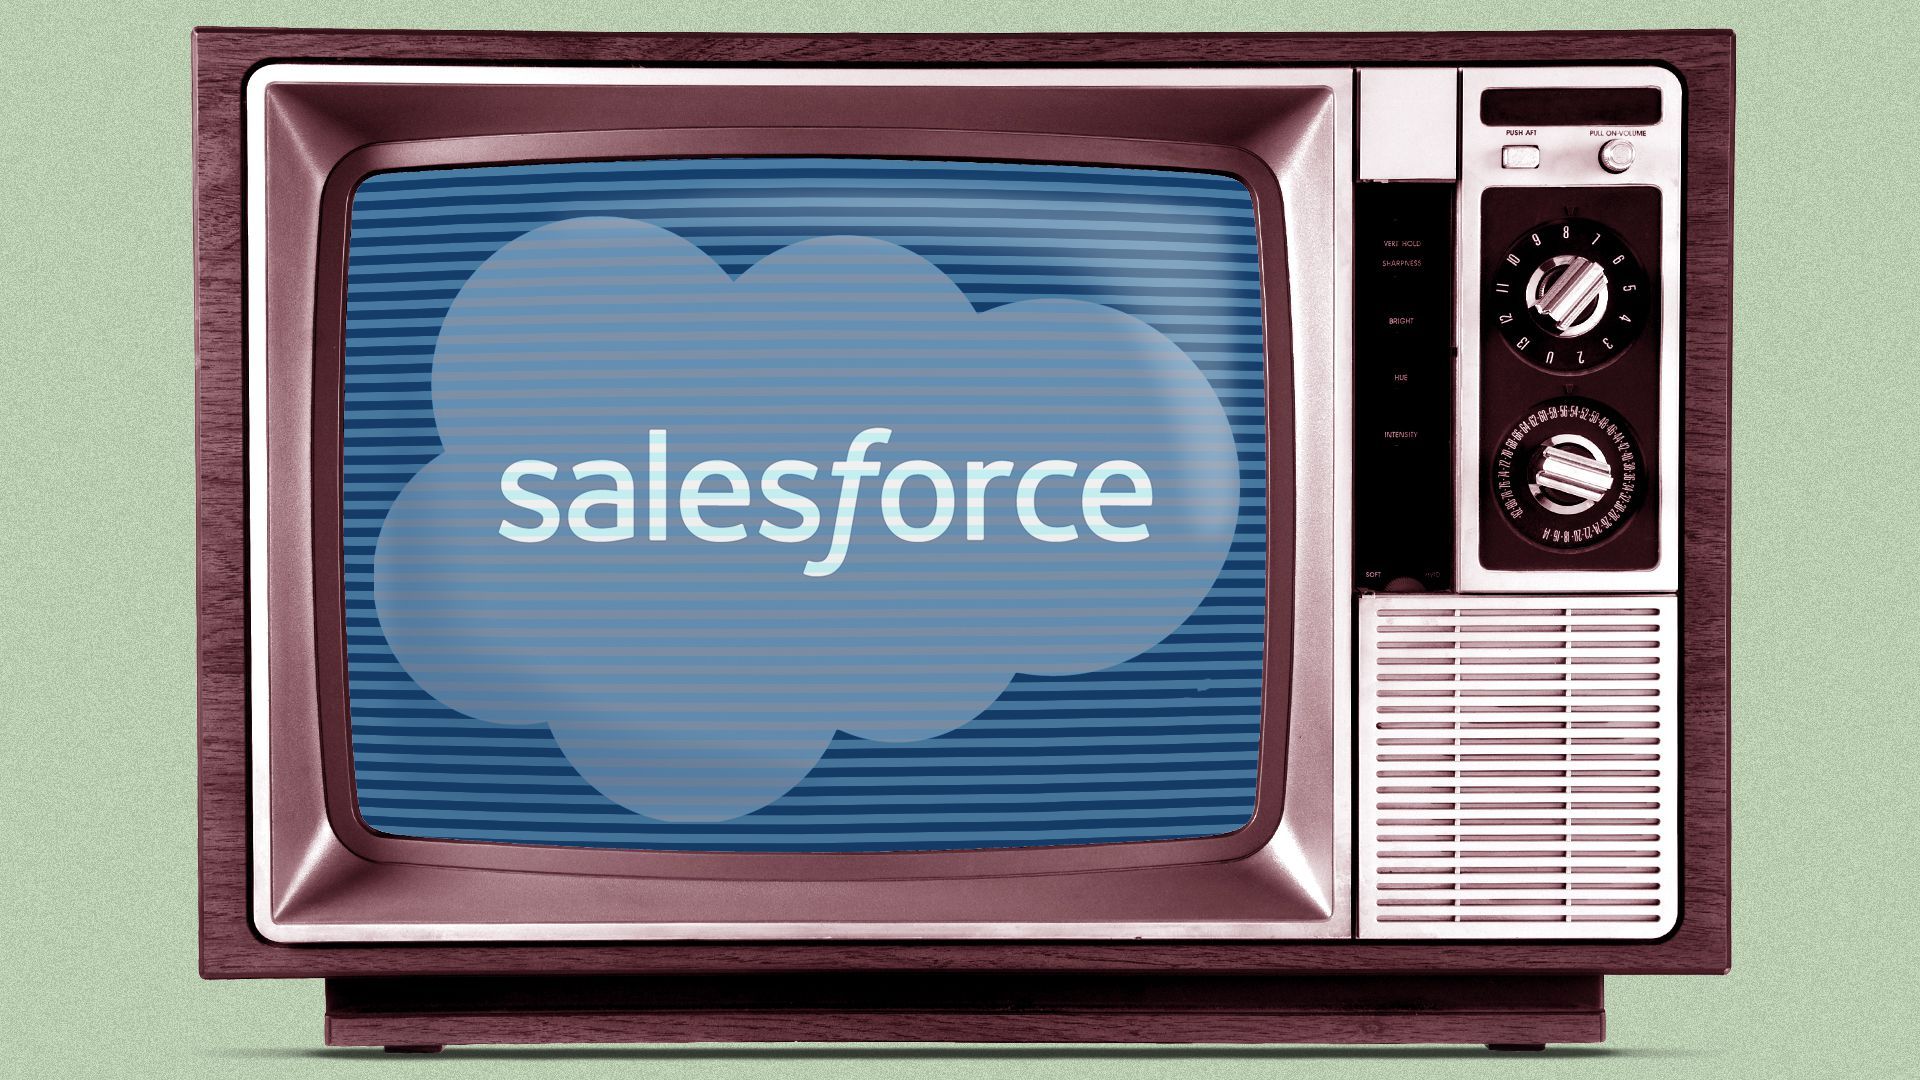 Illustration of an old TV with the Salesforce logo on the screen.